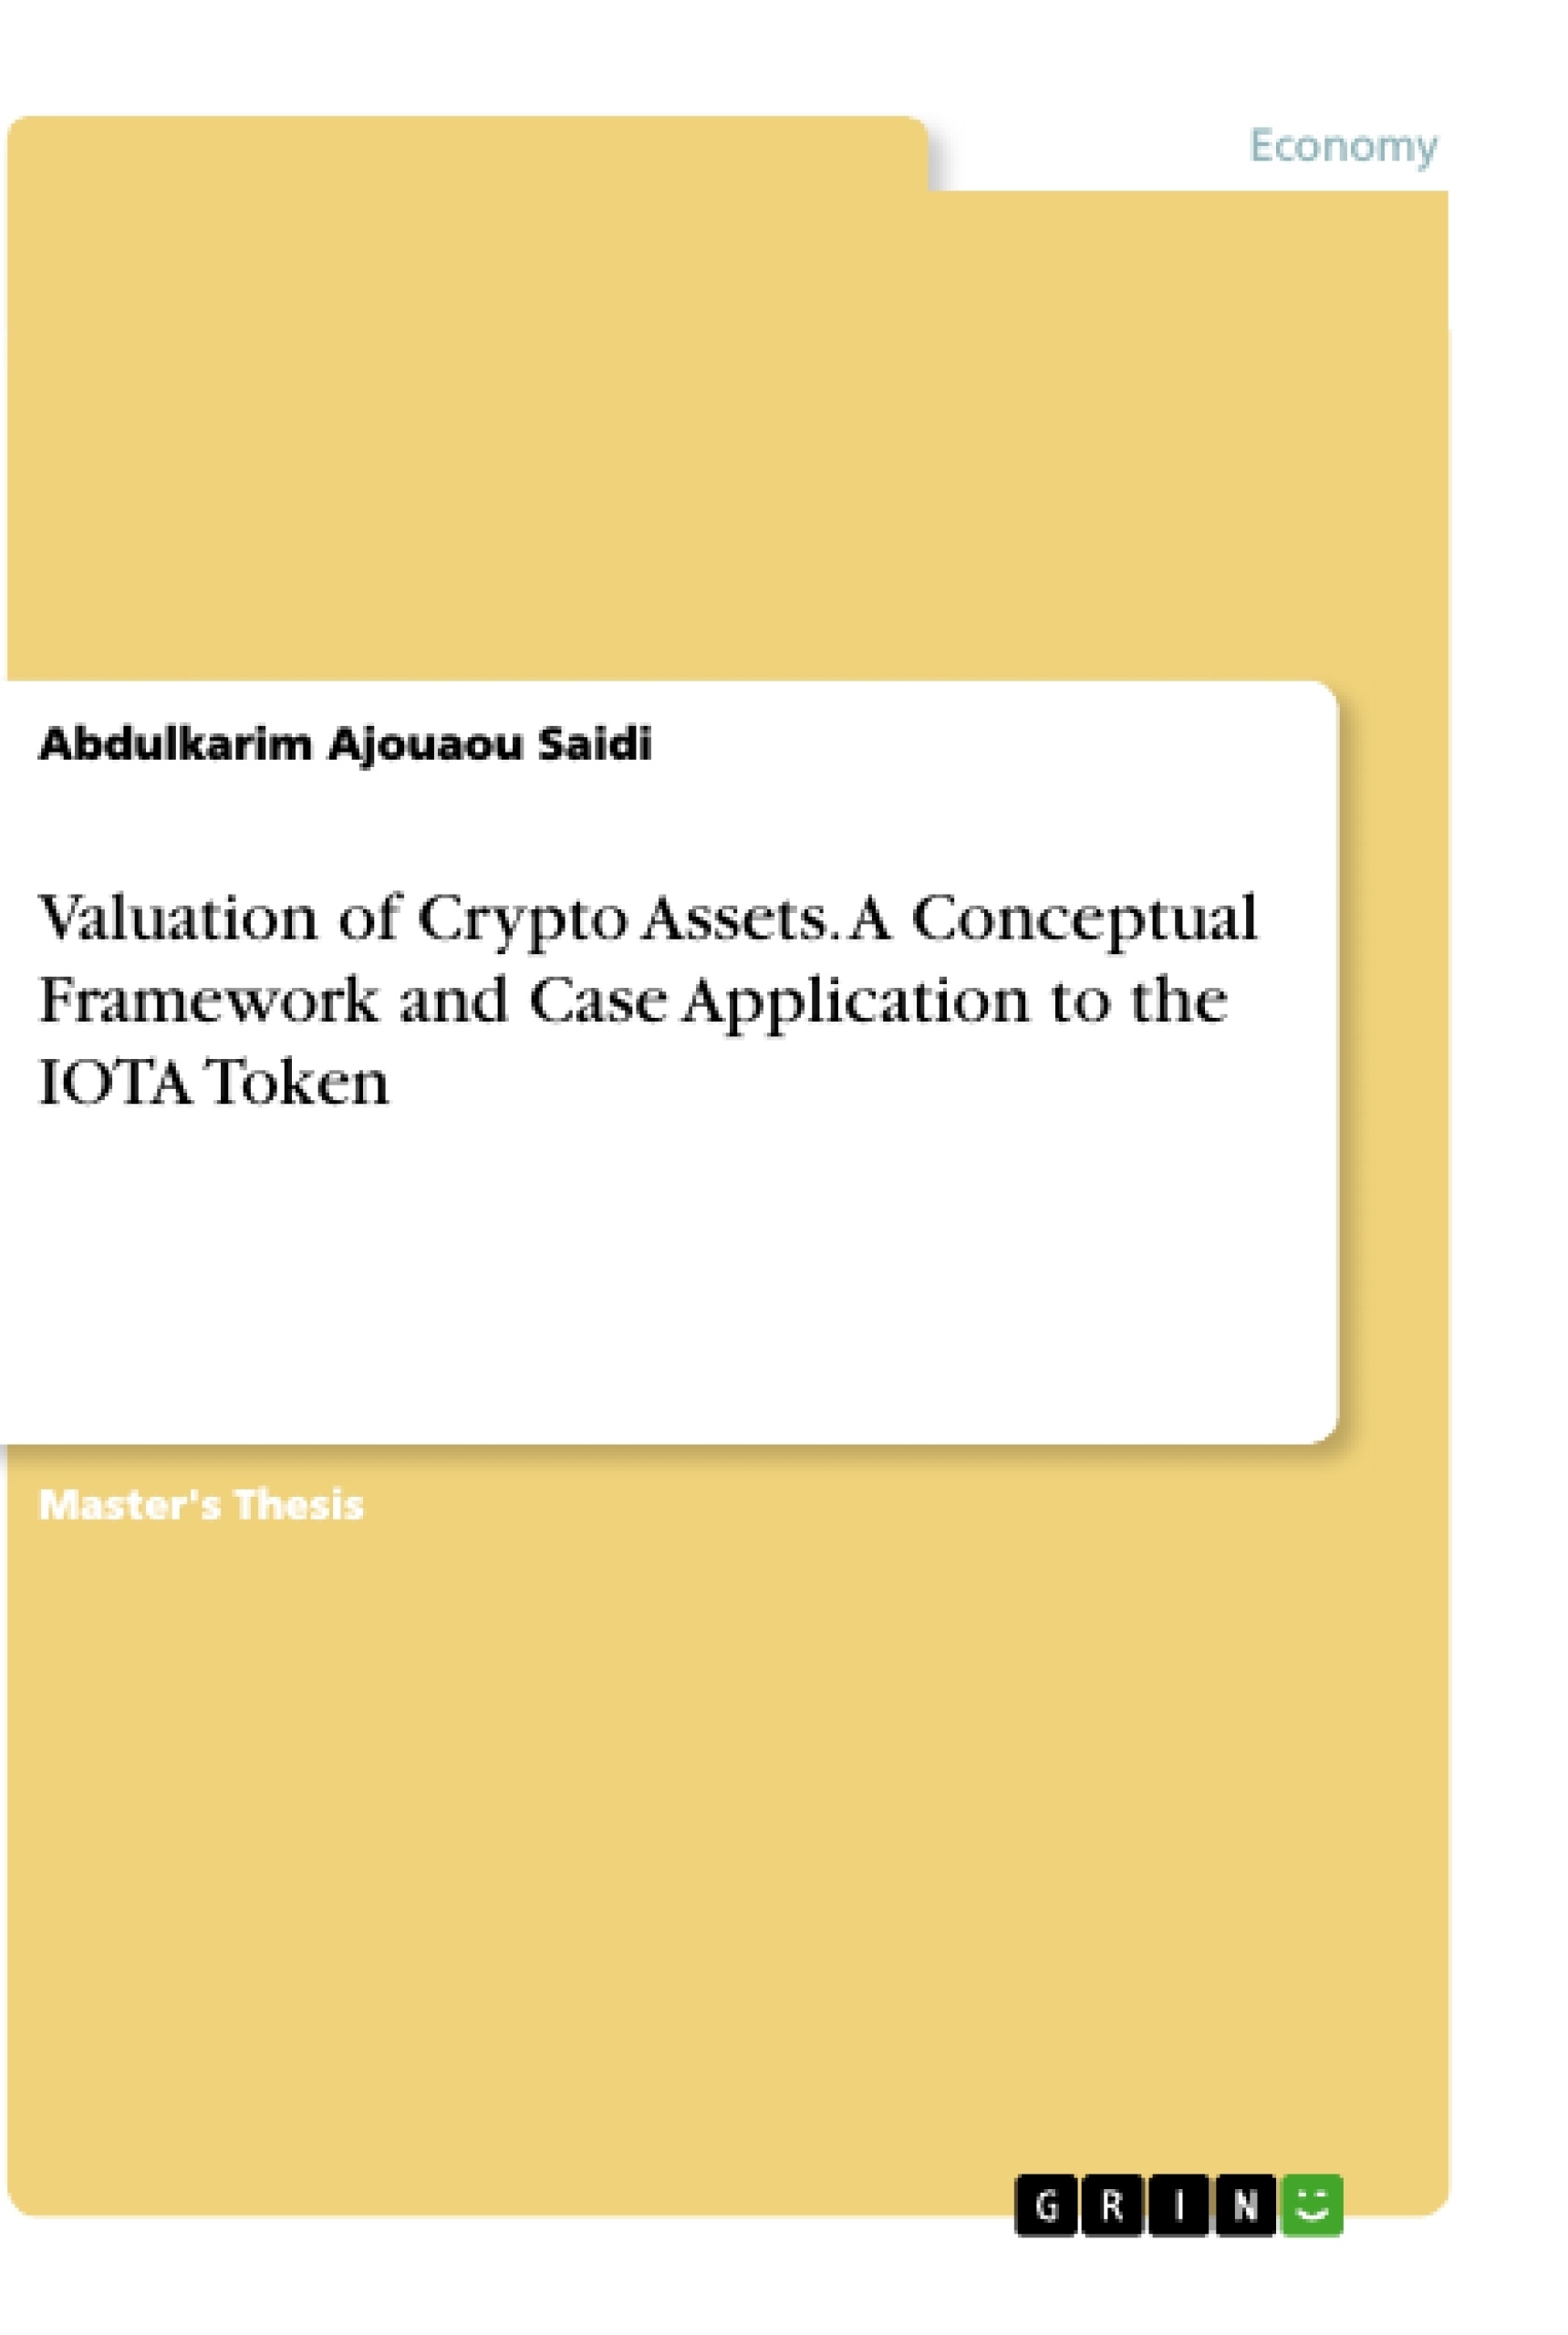 Title: Valuation of Crypto Assets. A Conceptual Framework and Case Application to the IOTA Token